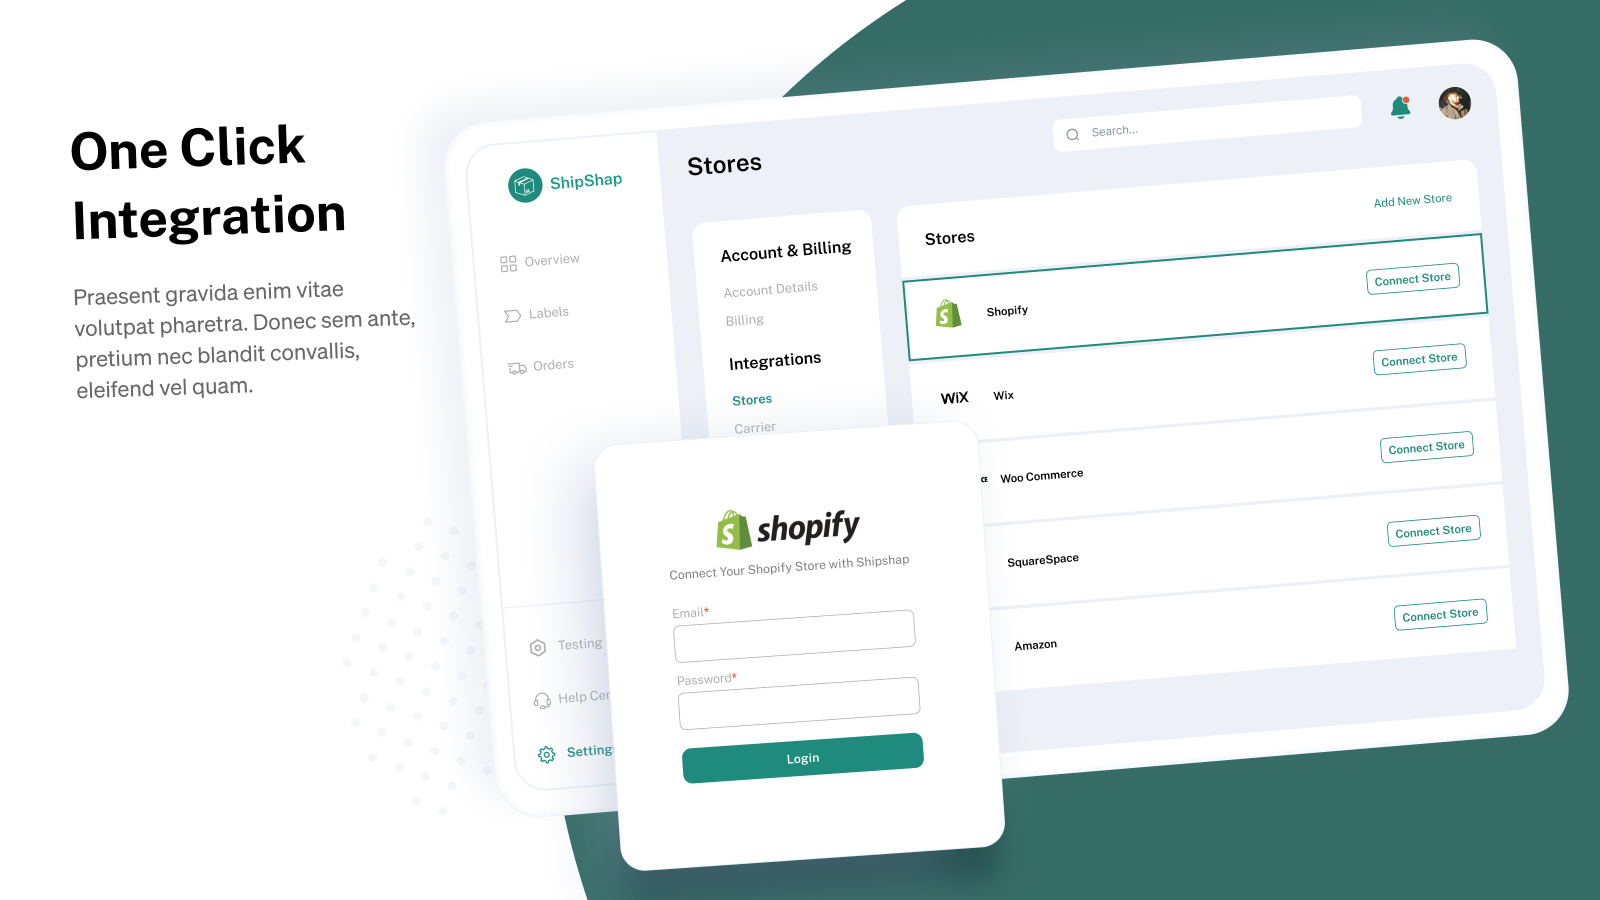 Login in with your Shopify credentials to connect your store!